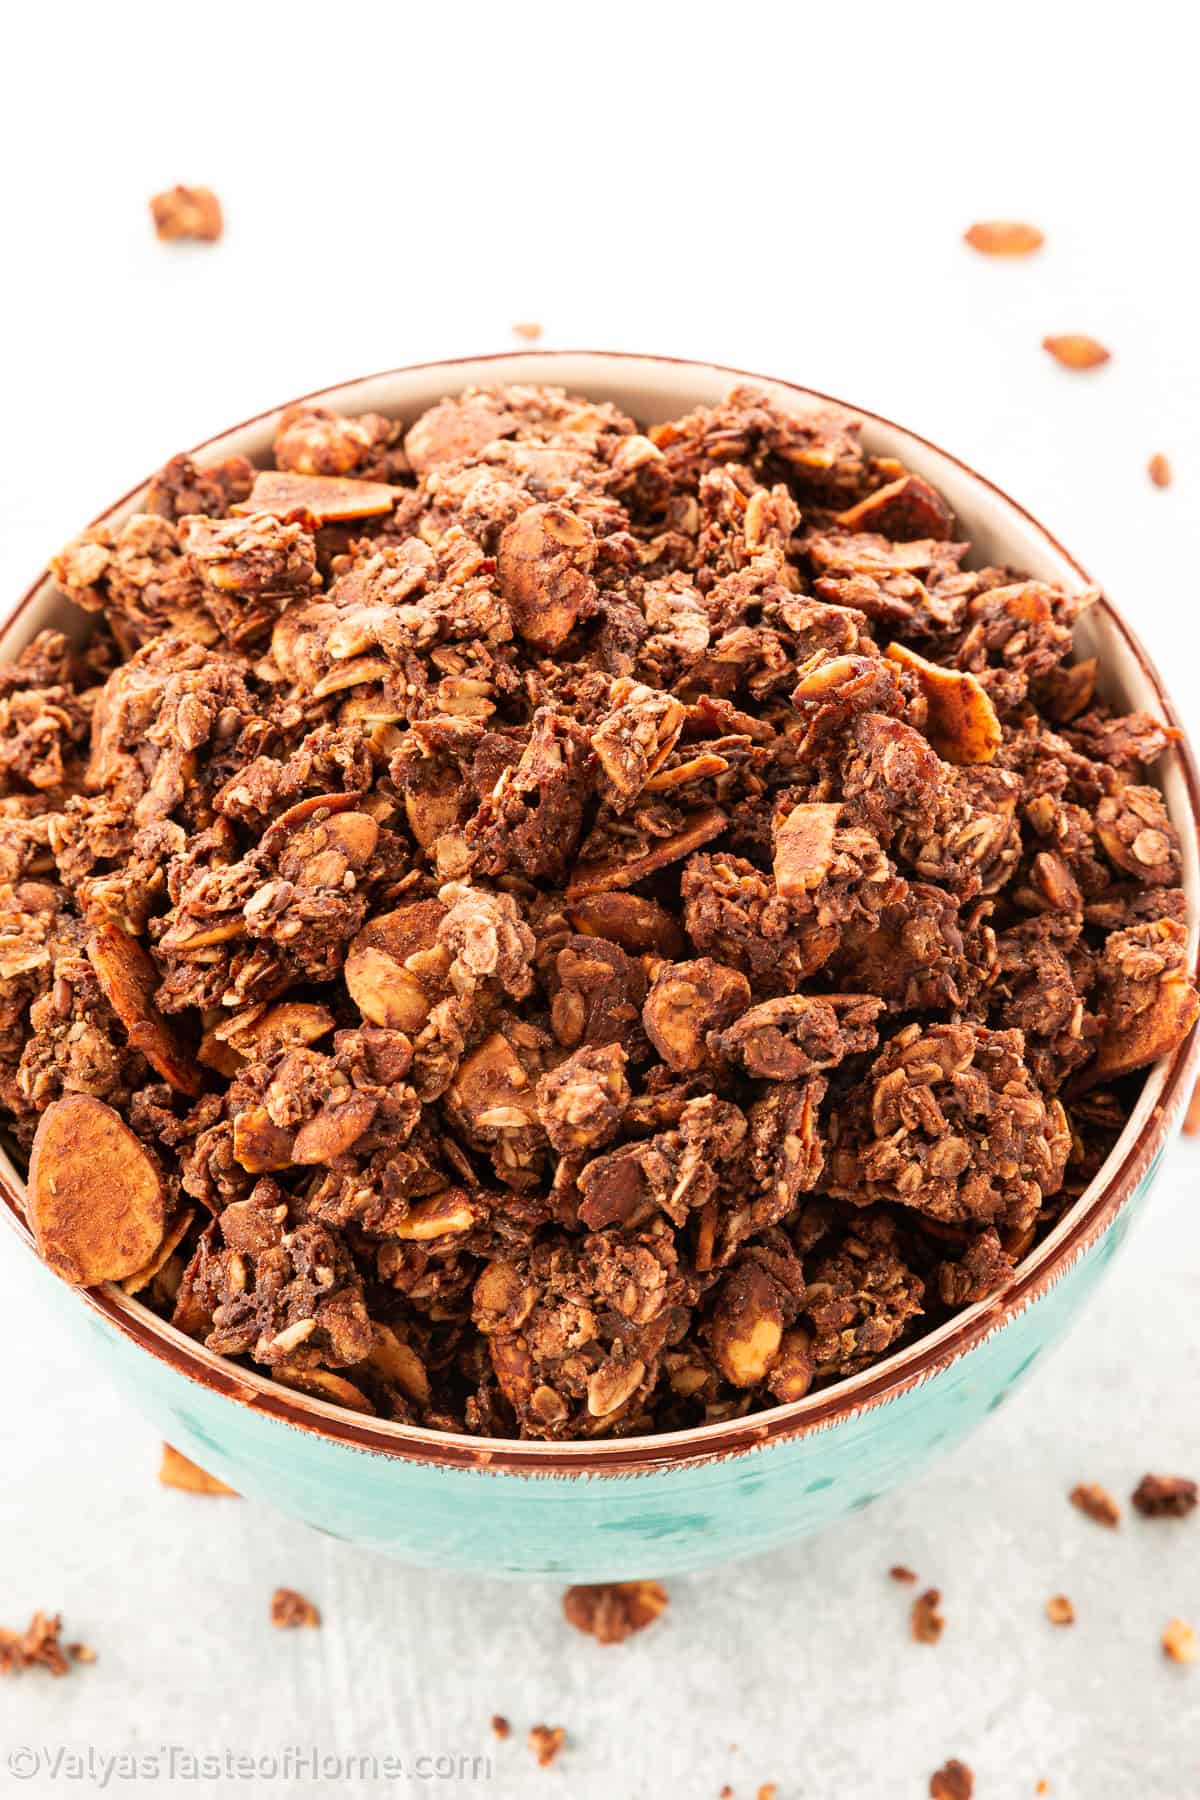 This healthy Chocolate Granola recipe is the perfect way to enjoy a delicious snack without worrying about unhealthy ingredients.